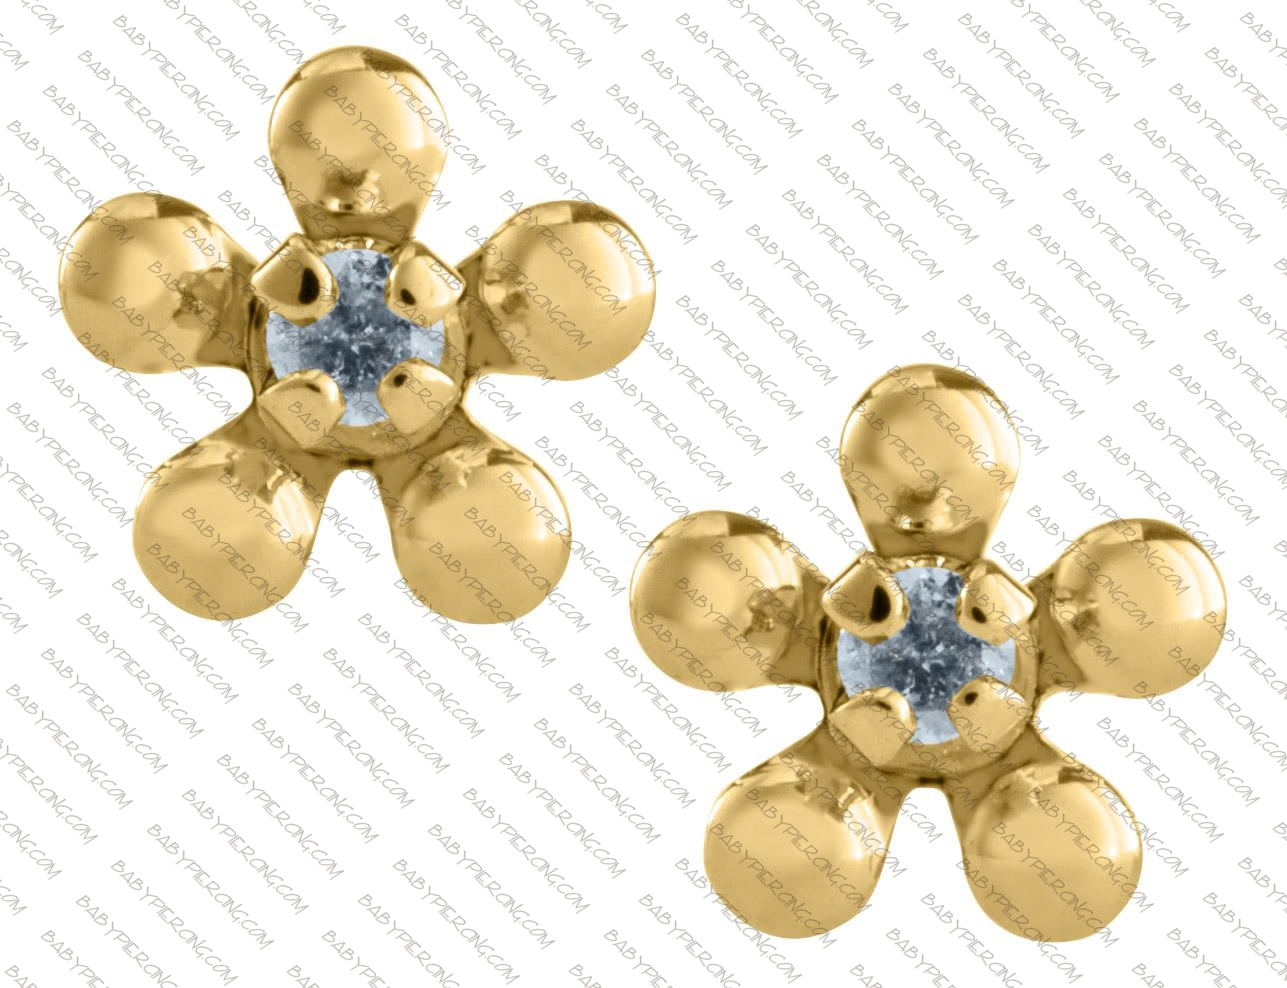 14kt Gold 5 Petal Design Flower Earring with 2pt tcw Center Diamond.
ONLY IN YELLOW GOLD